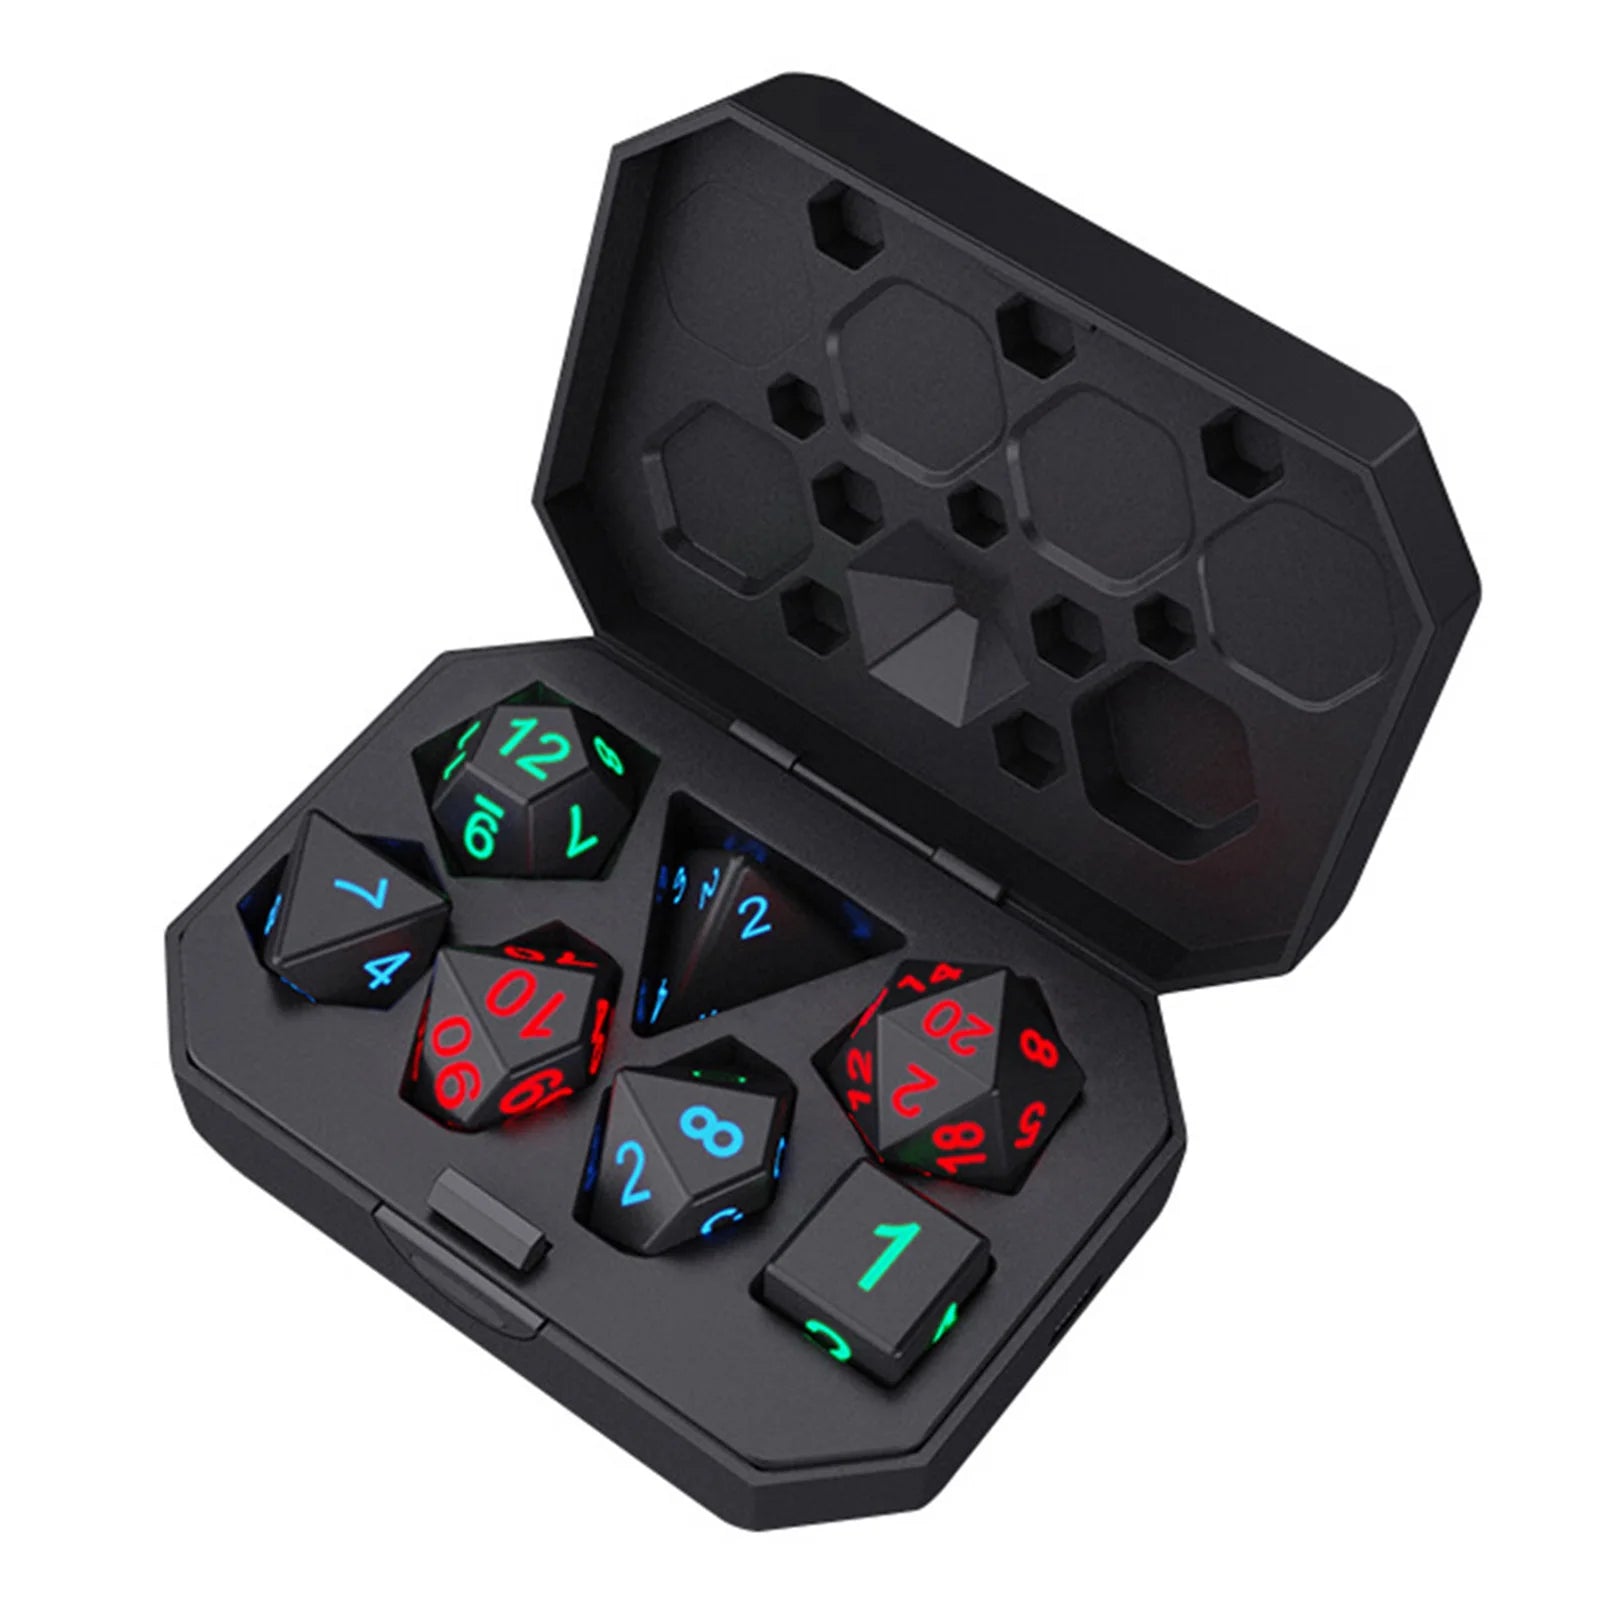 7Pcs/Set Electronic Dice USB Rechargeable Luminous Dice Glow in the Dark DND Dices RPG Polyhedral Dice RPG D4 D6 D8 D10 D12 D20 - Orvis Collection